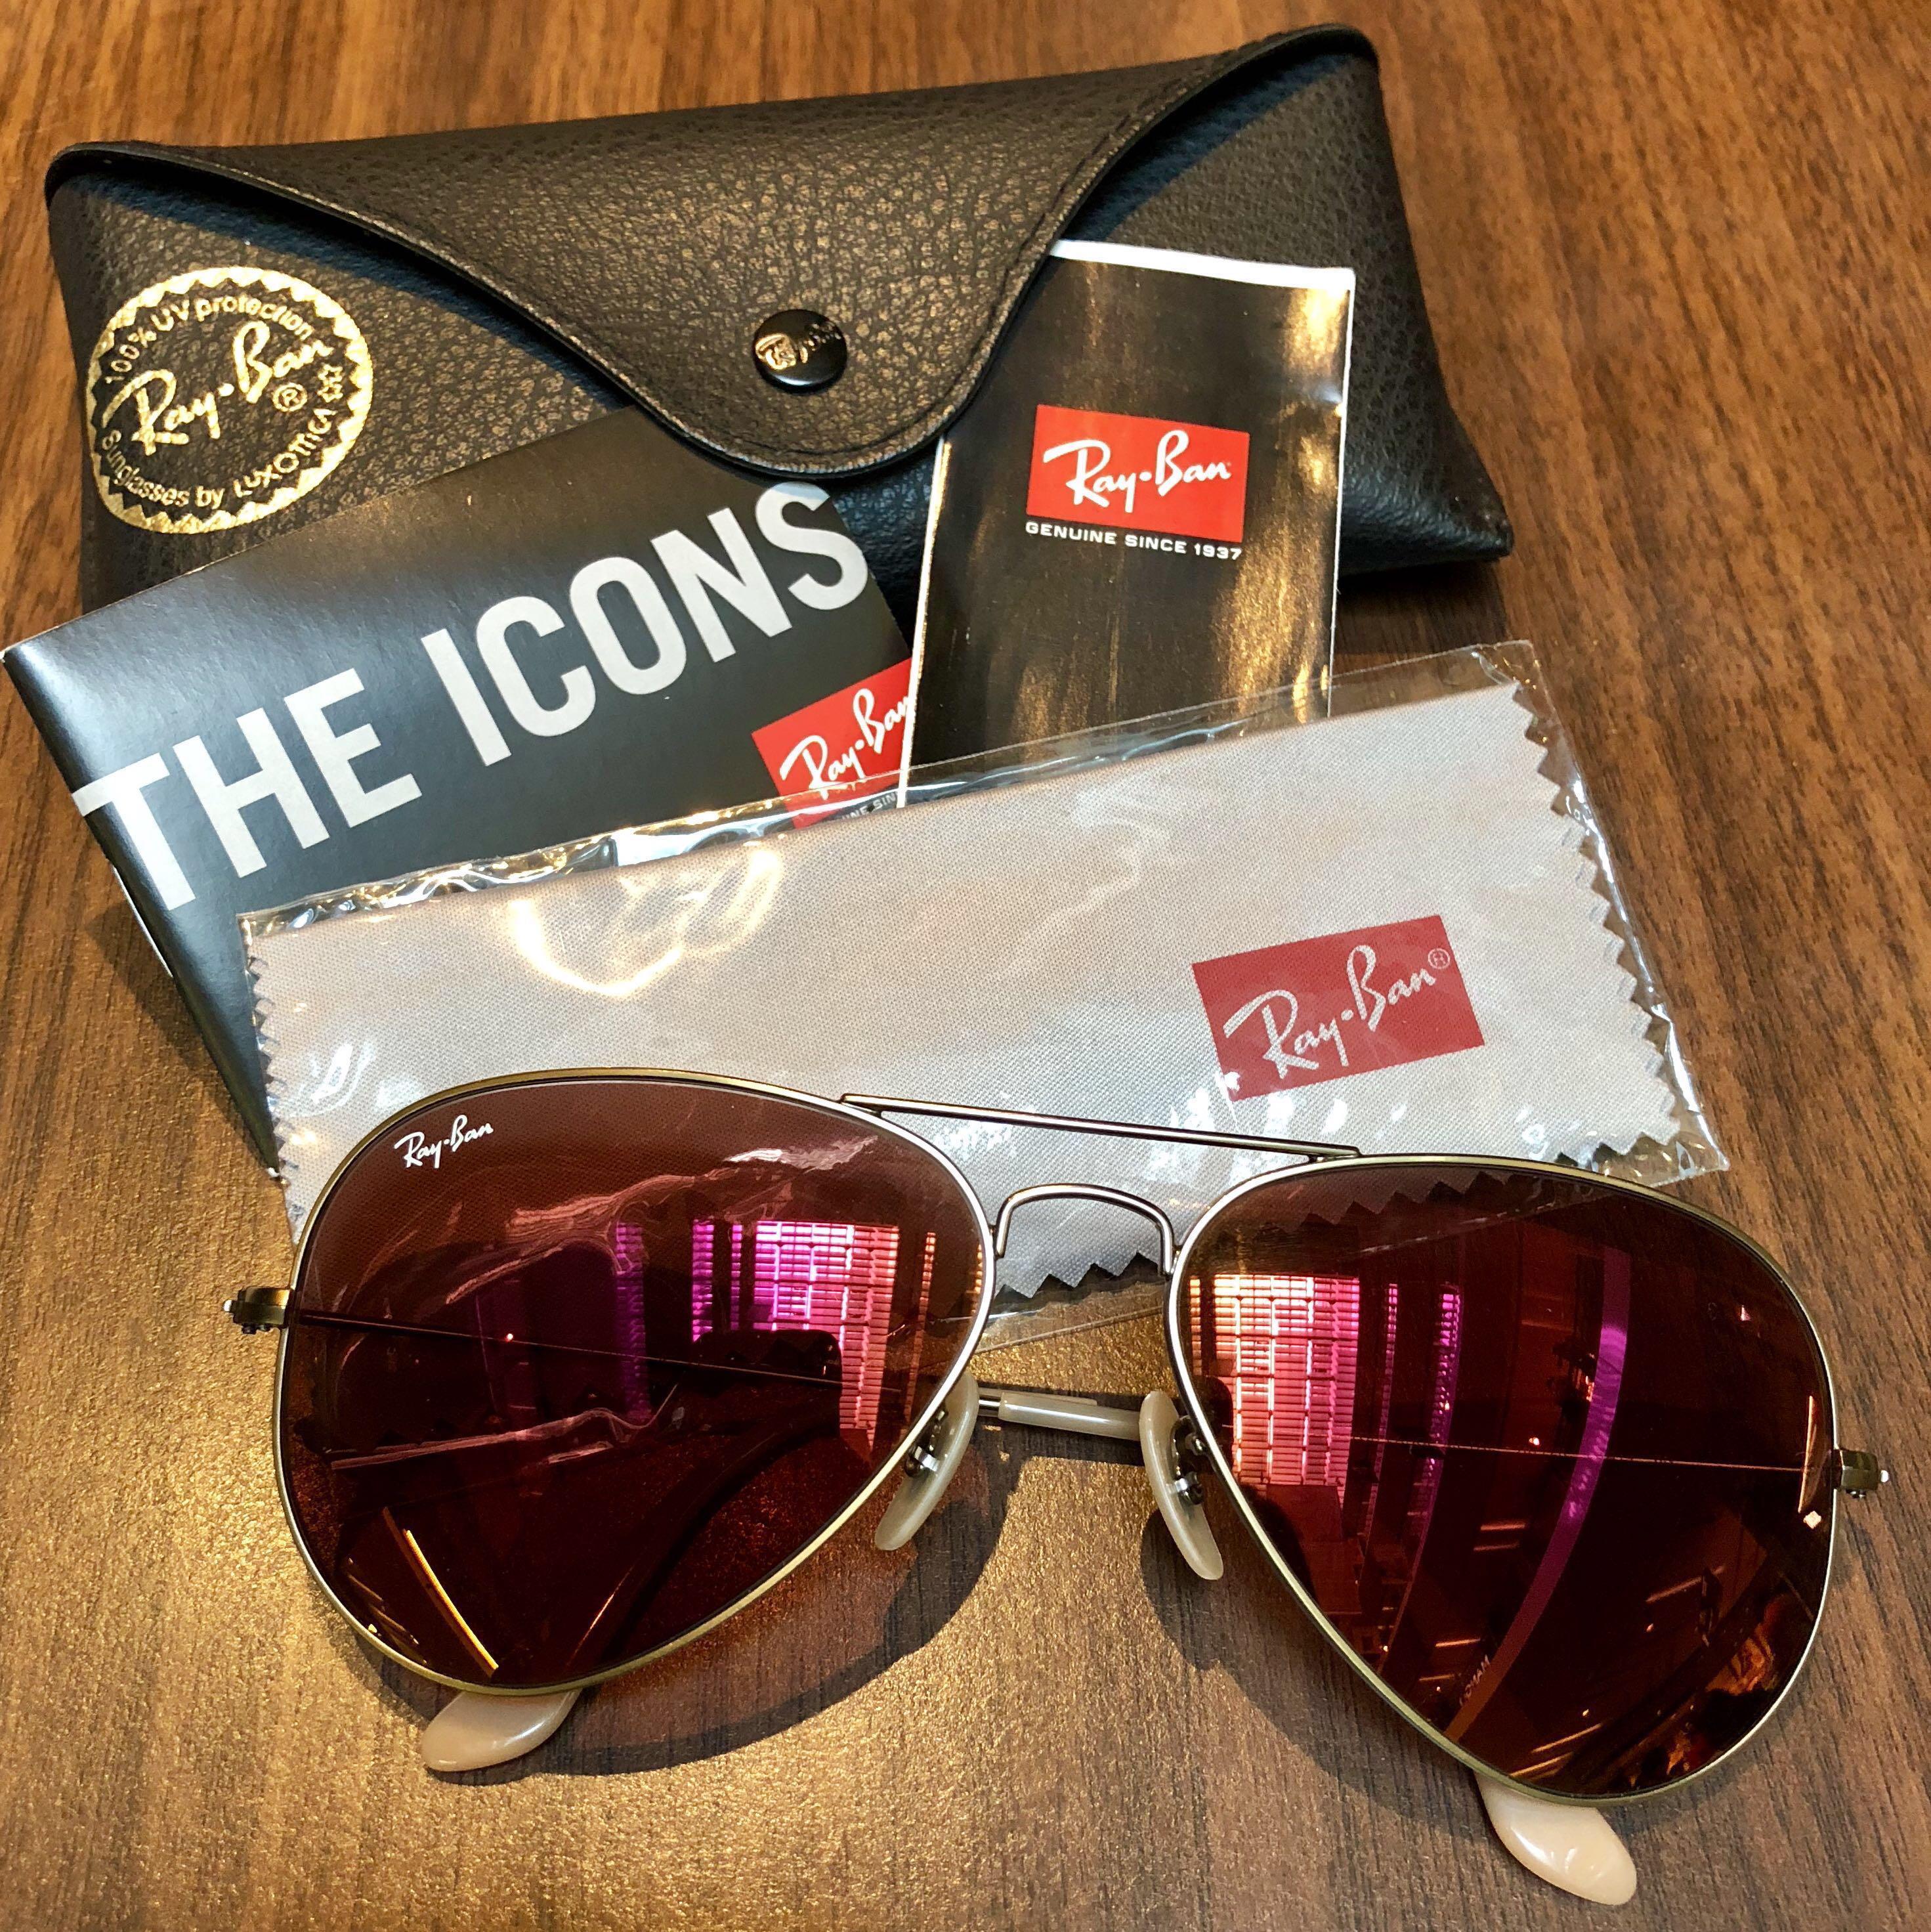 red mirror sunglasses ray ban